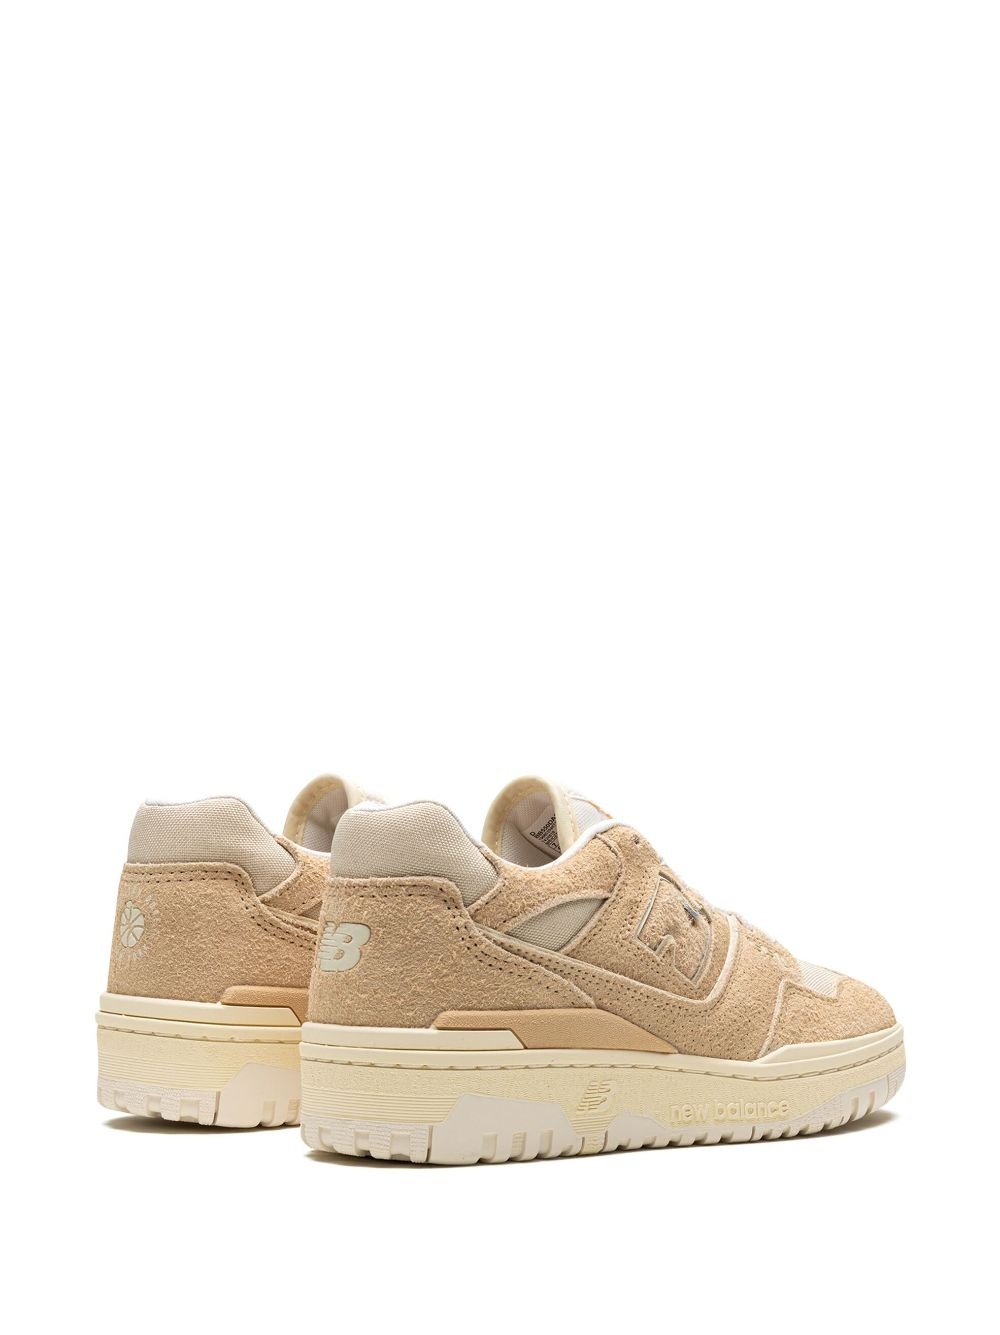 550 "Aime Leon Dore Taupe Suede" sneakers - 3